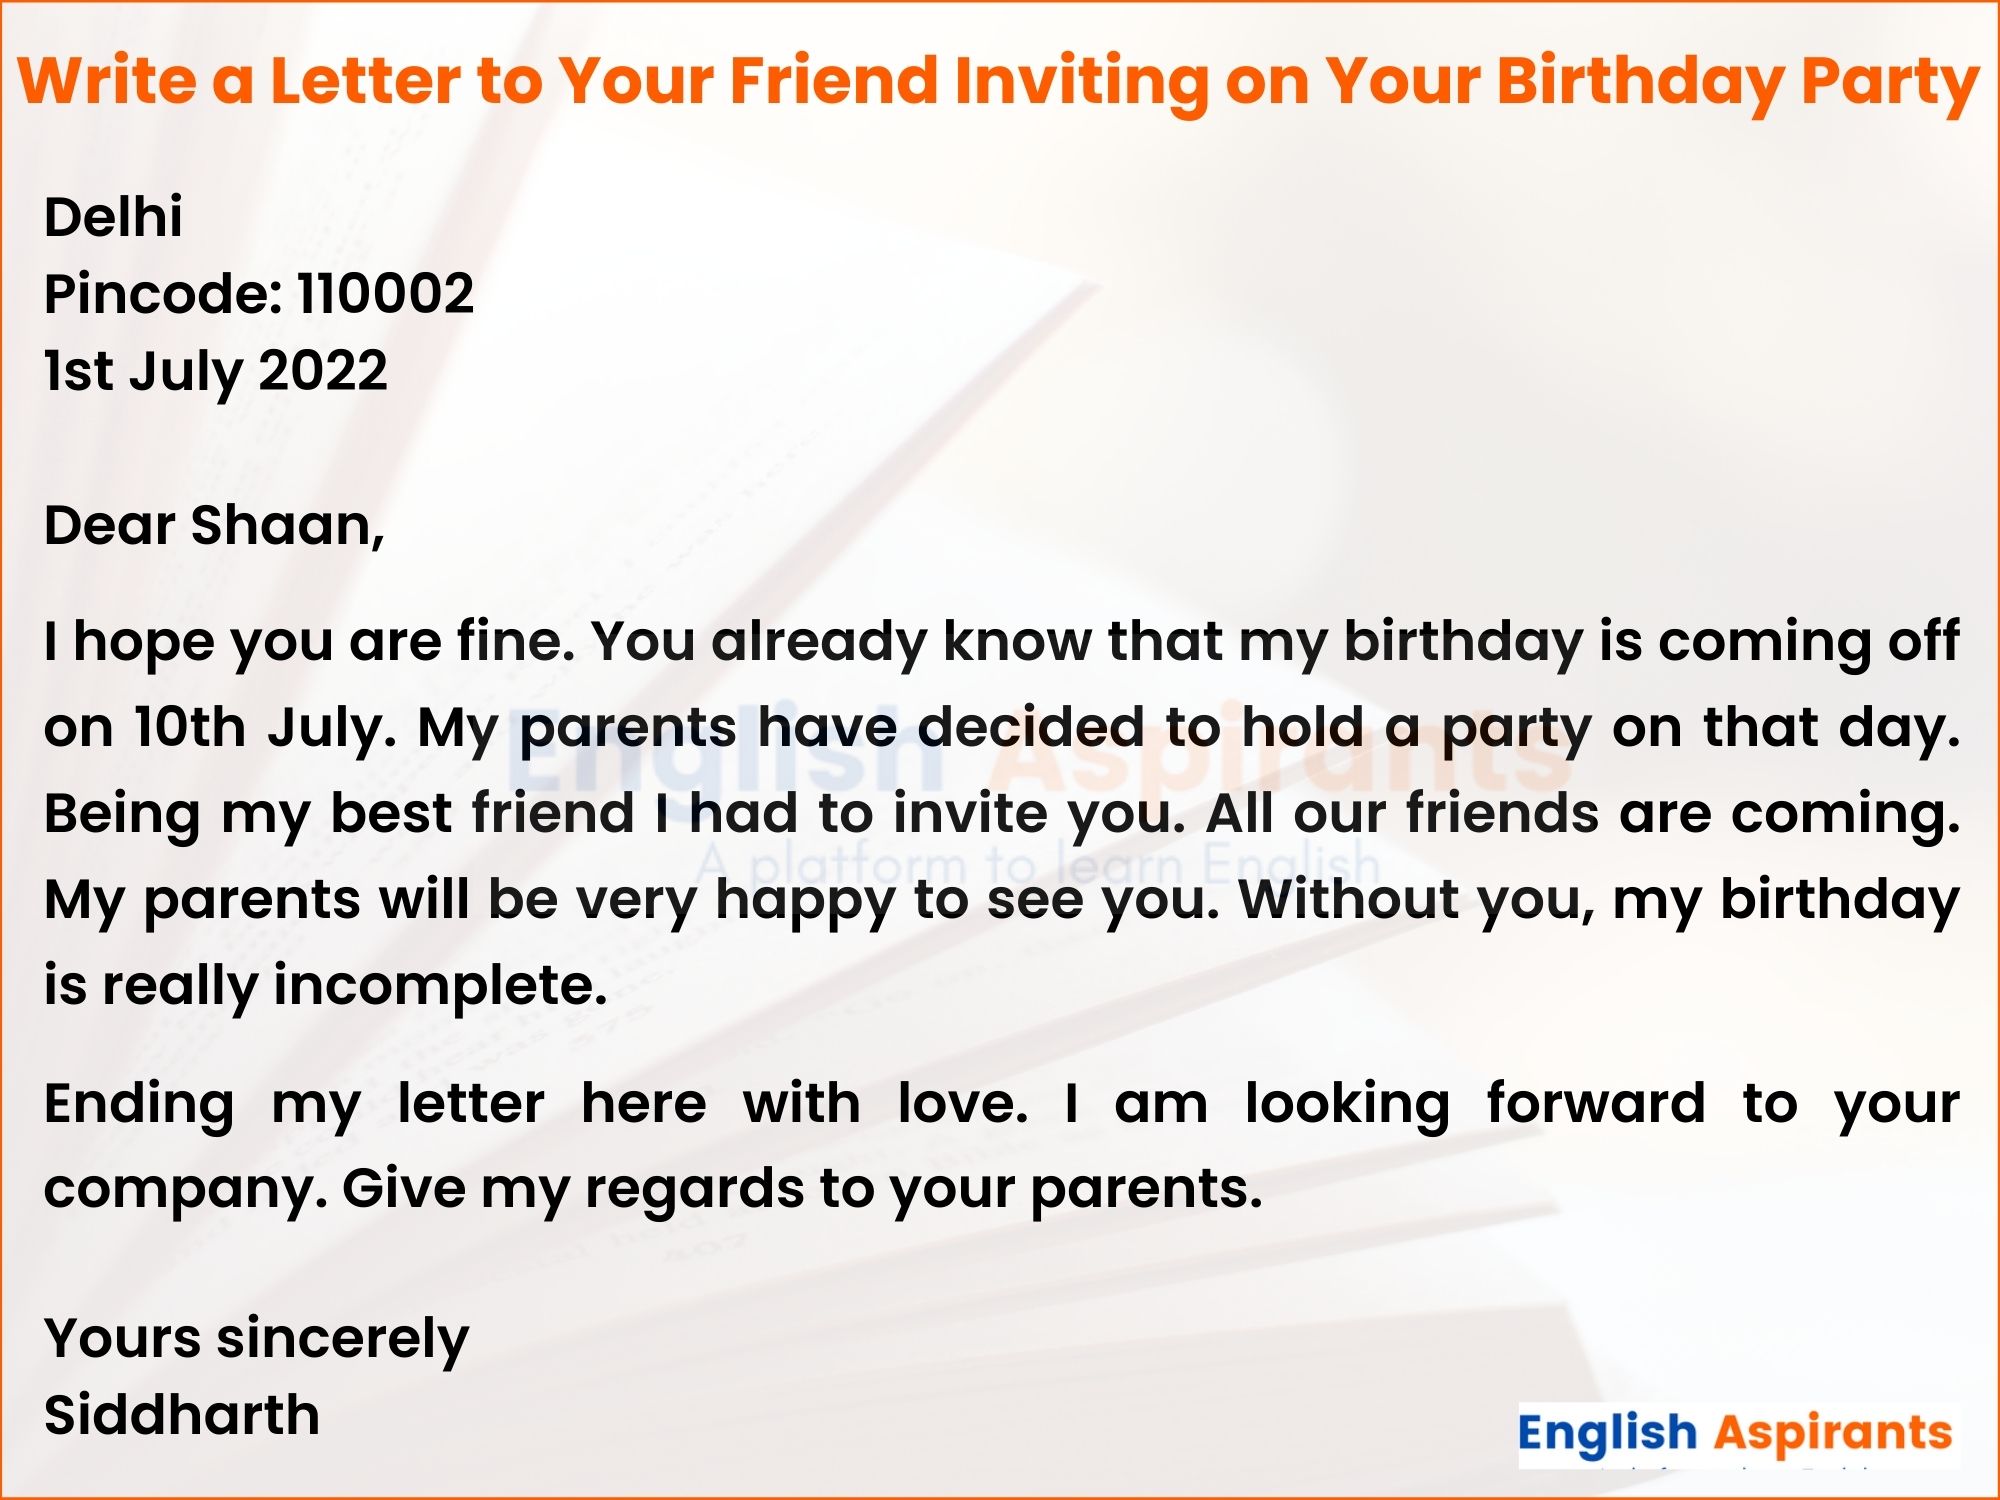 write a letter to your friend inviting on your birthday party